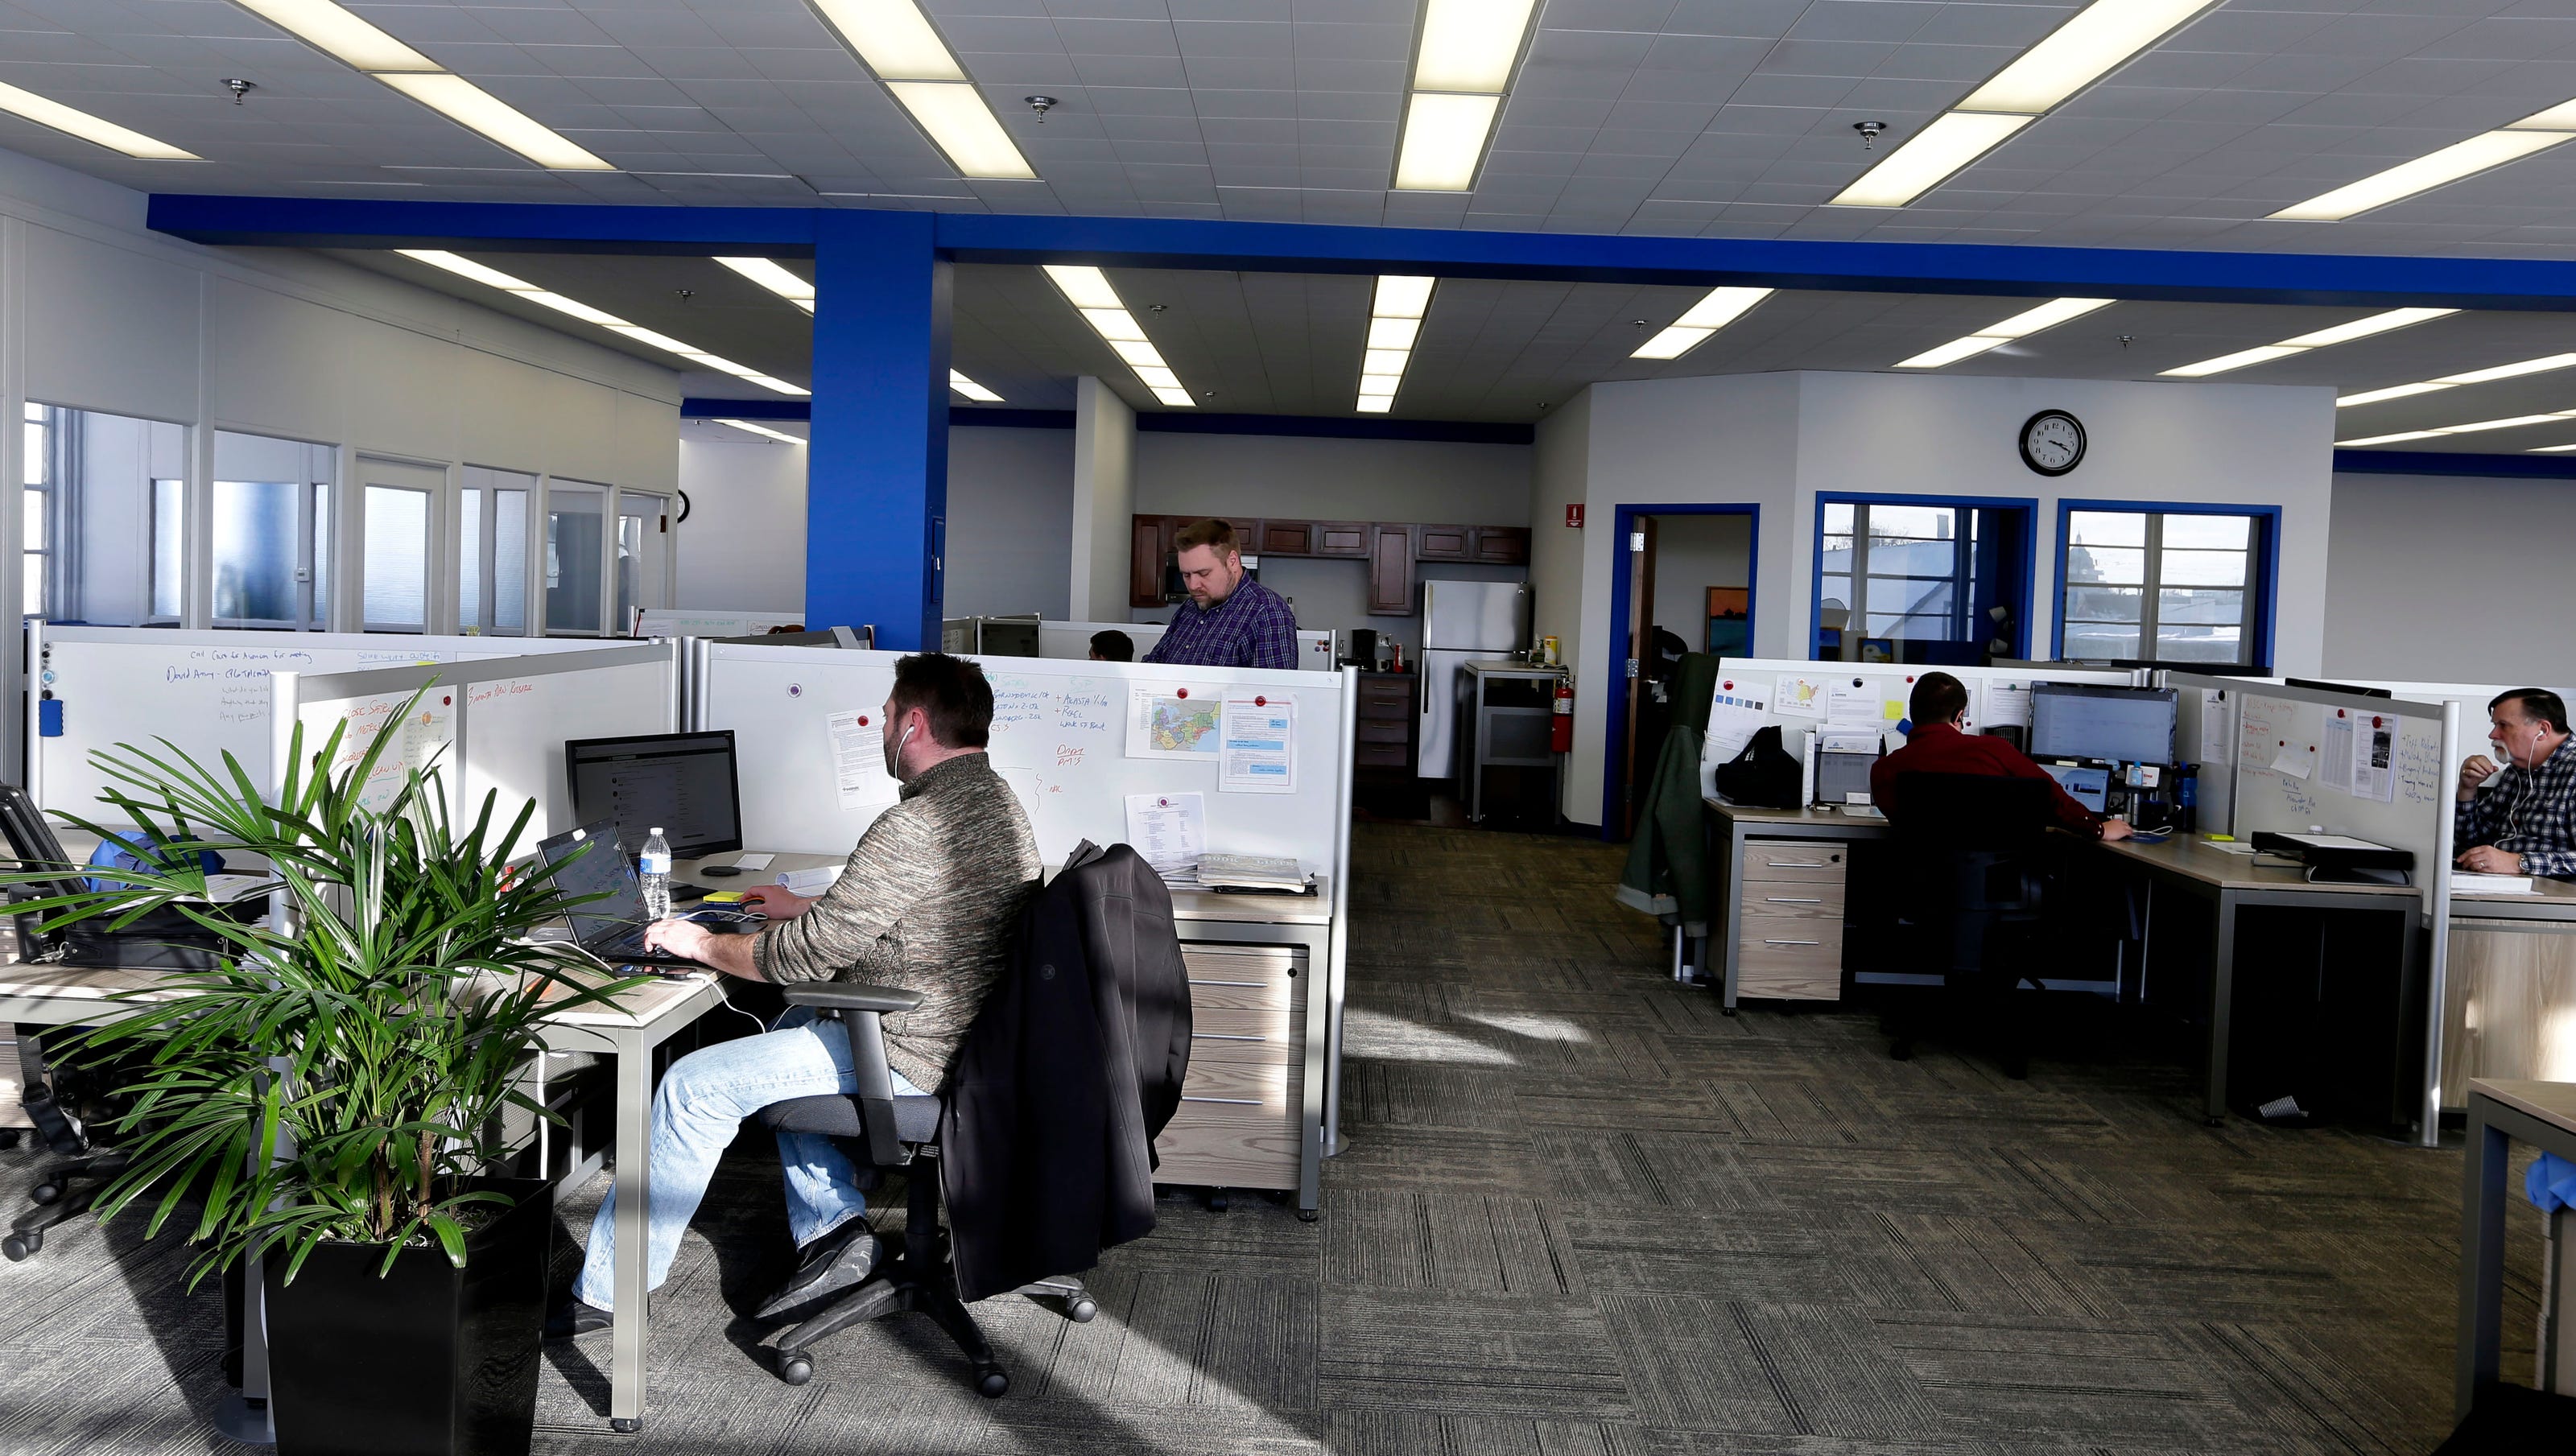 Goodbye cubicle farm: Office design changing to lure young workers